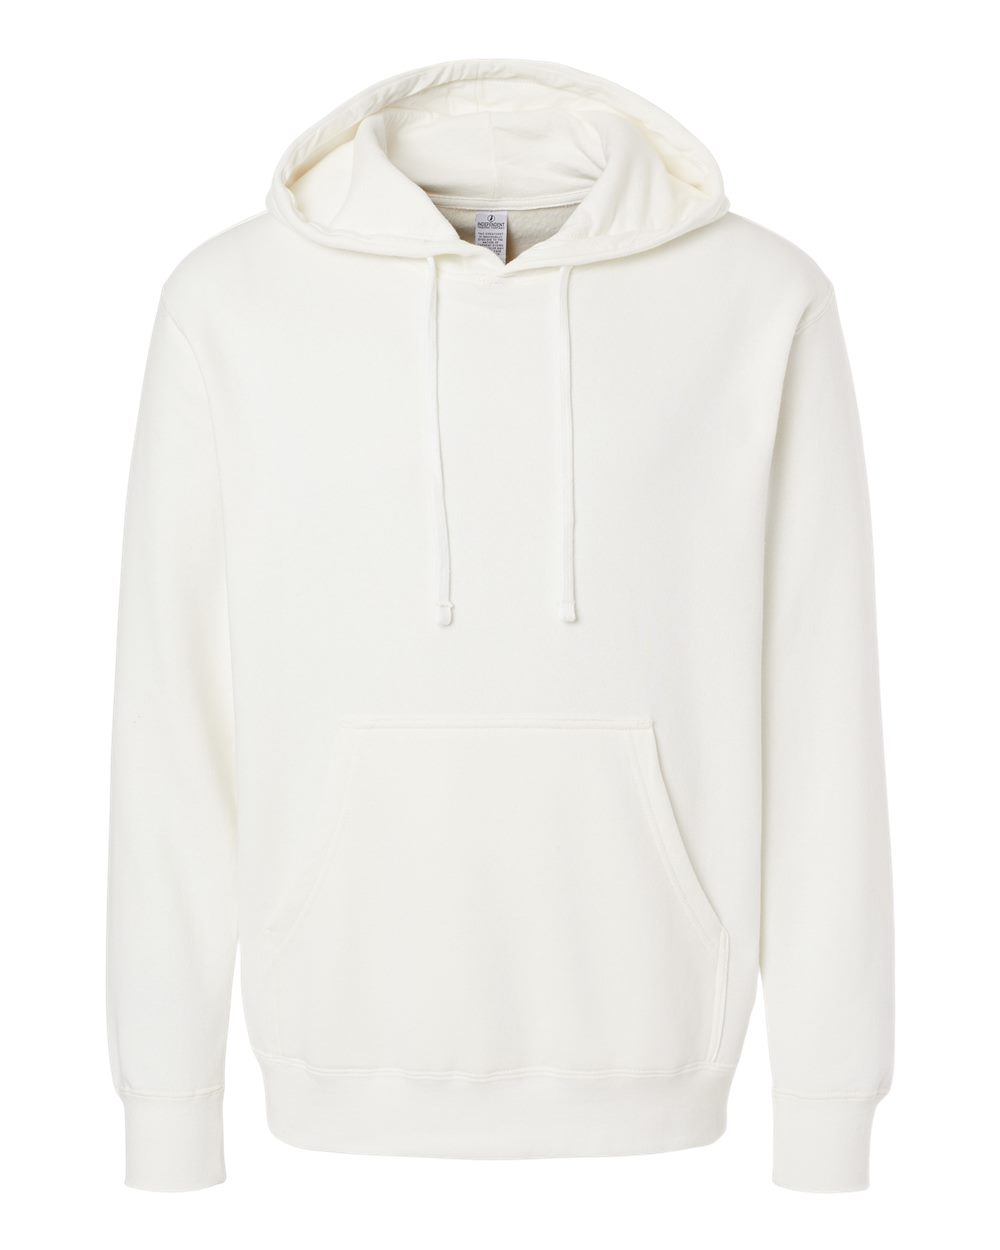 Midweight Pigment-Dyed Hooded Sweatshirt - Independent Trading Co. PRM4500